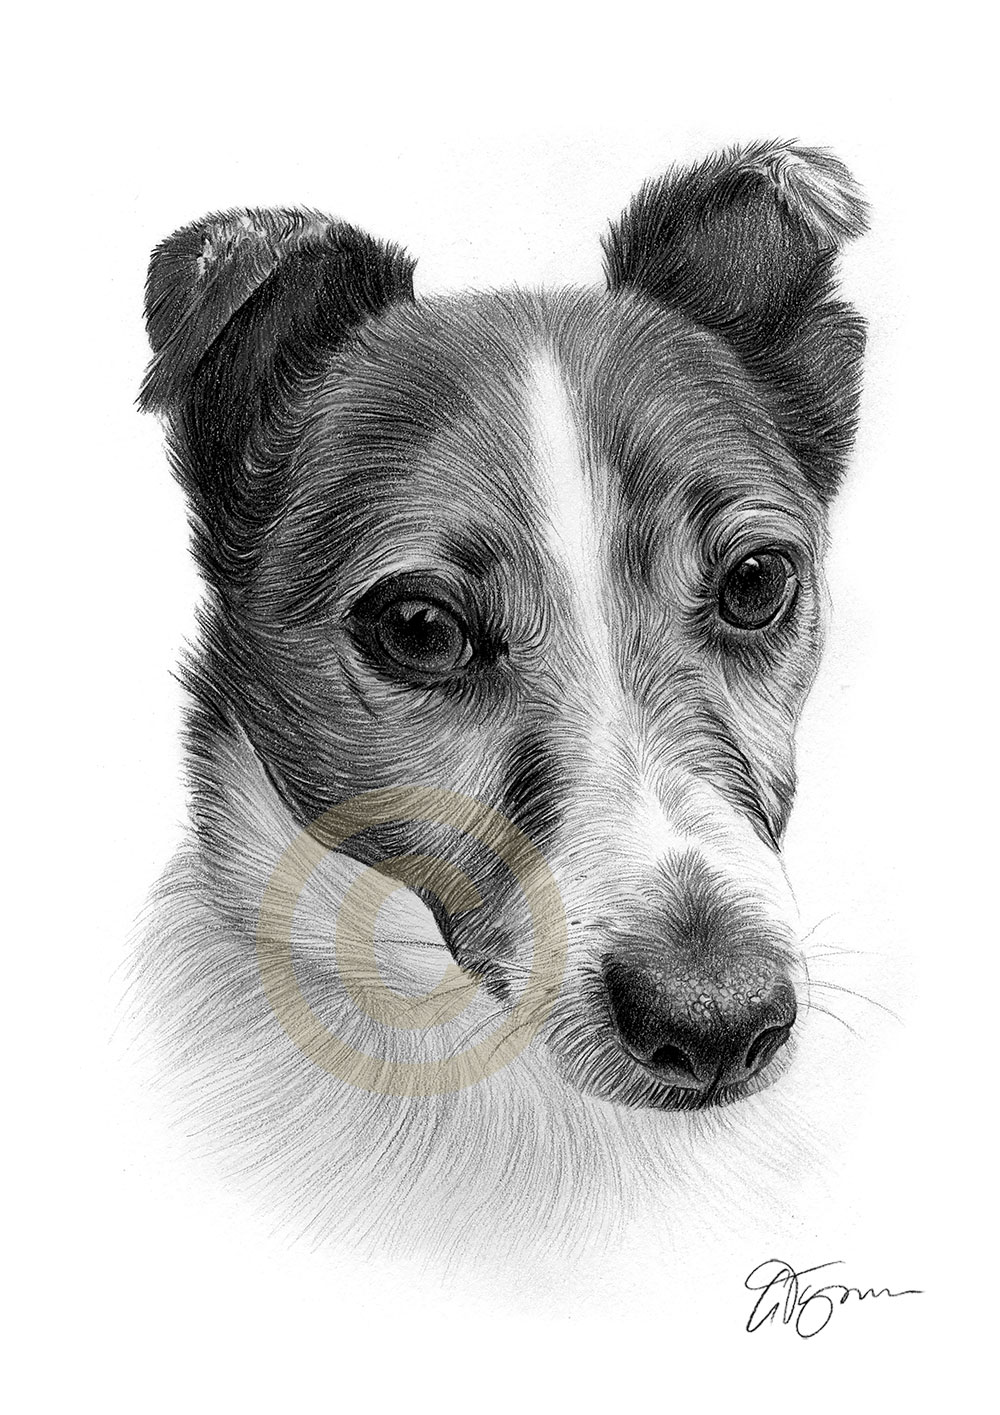 Pet portrait commission of a jack russell terrier called Harvey by artist Gary Tymon